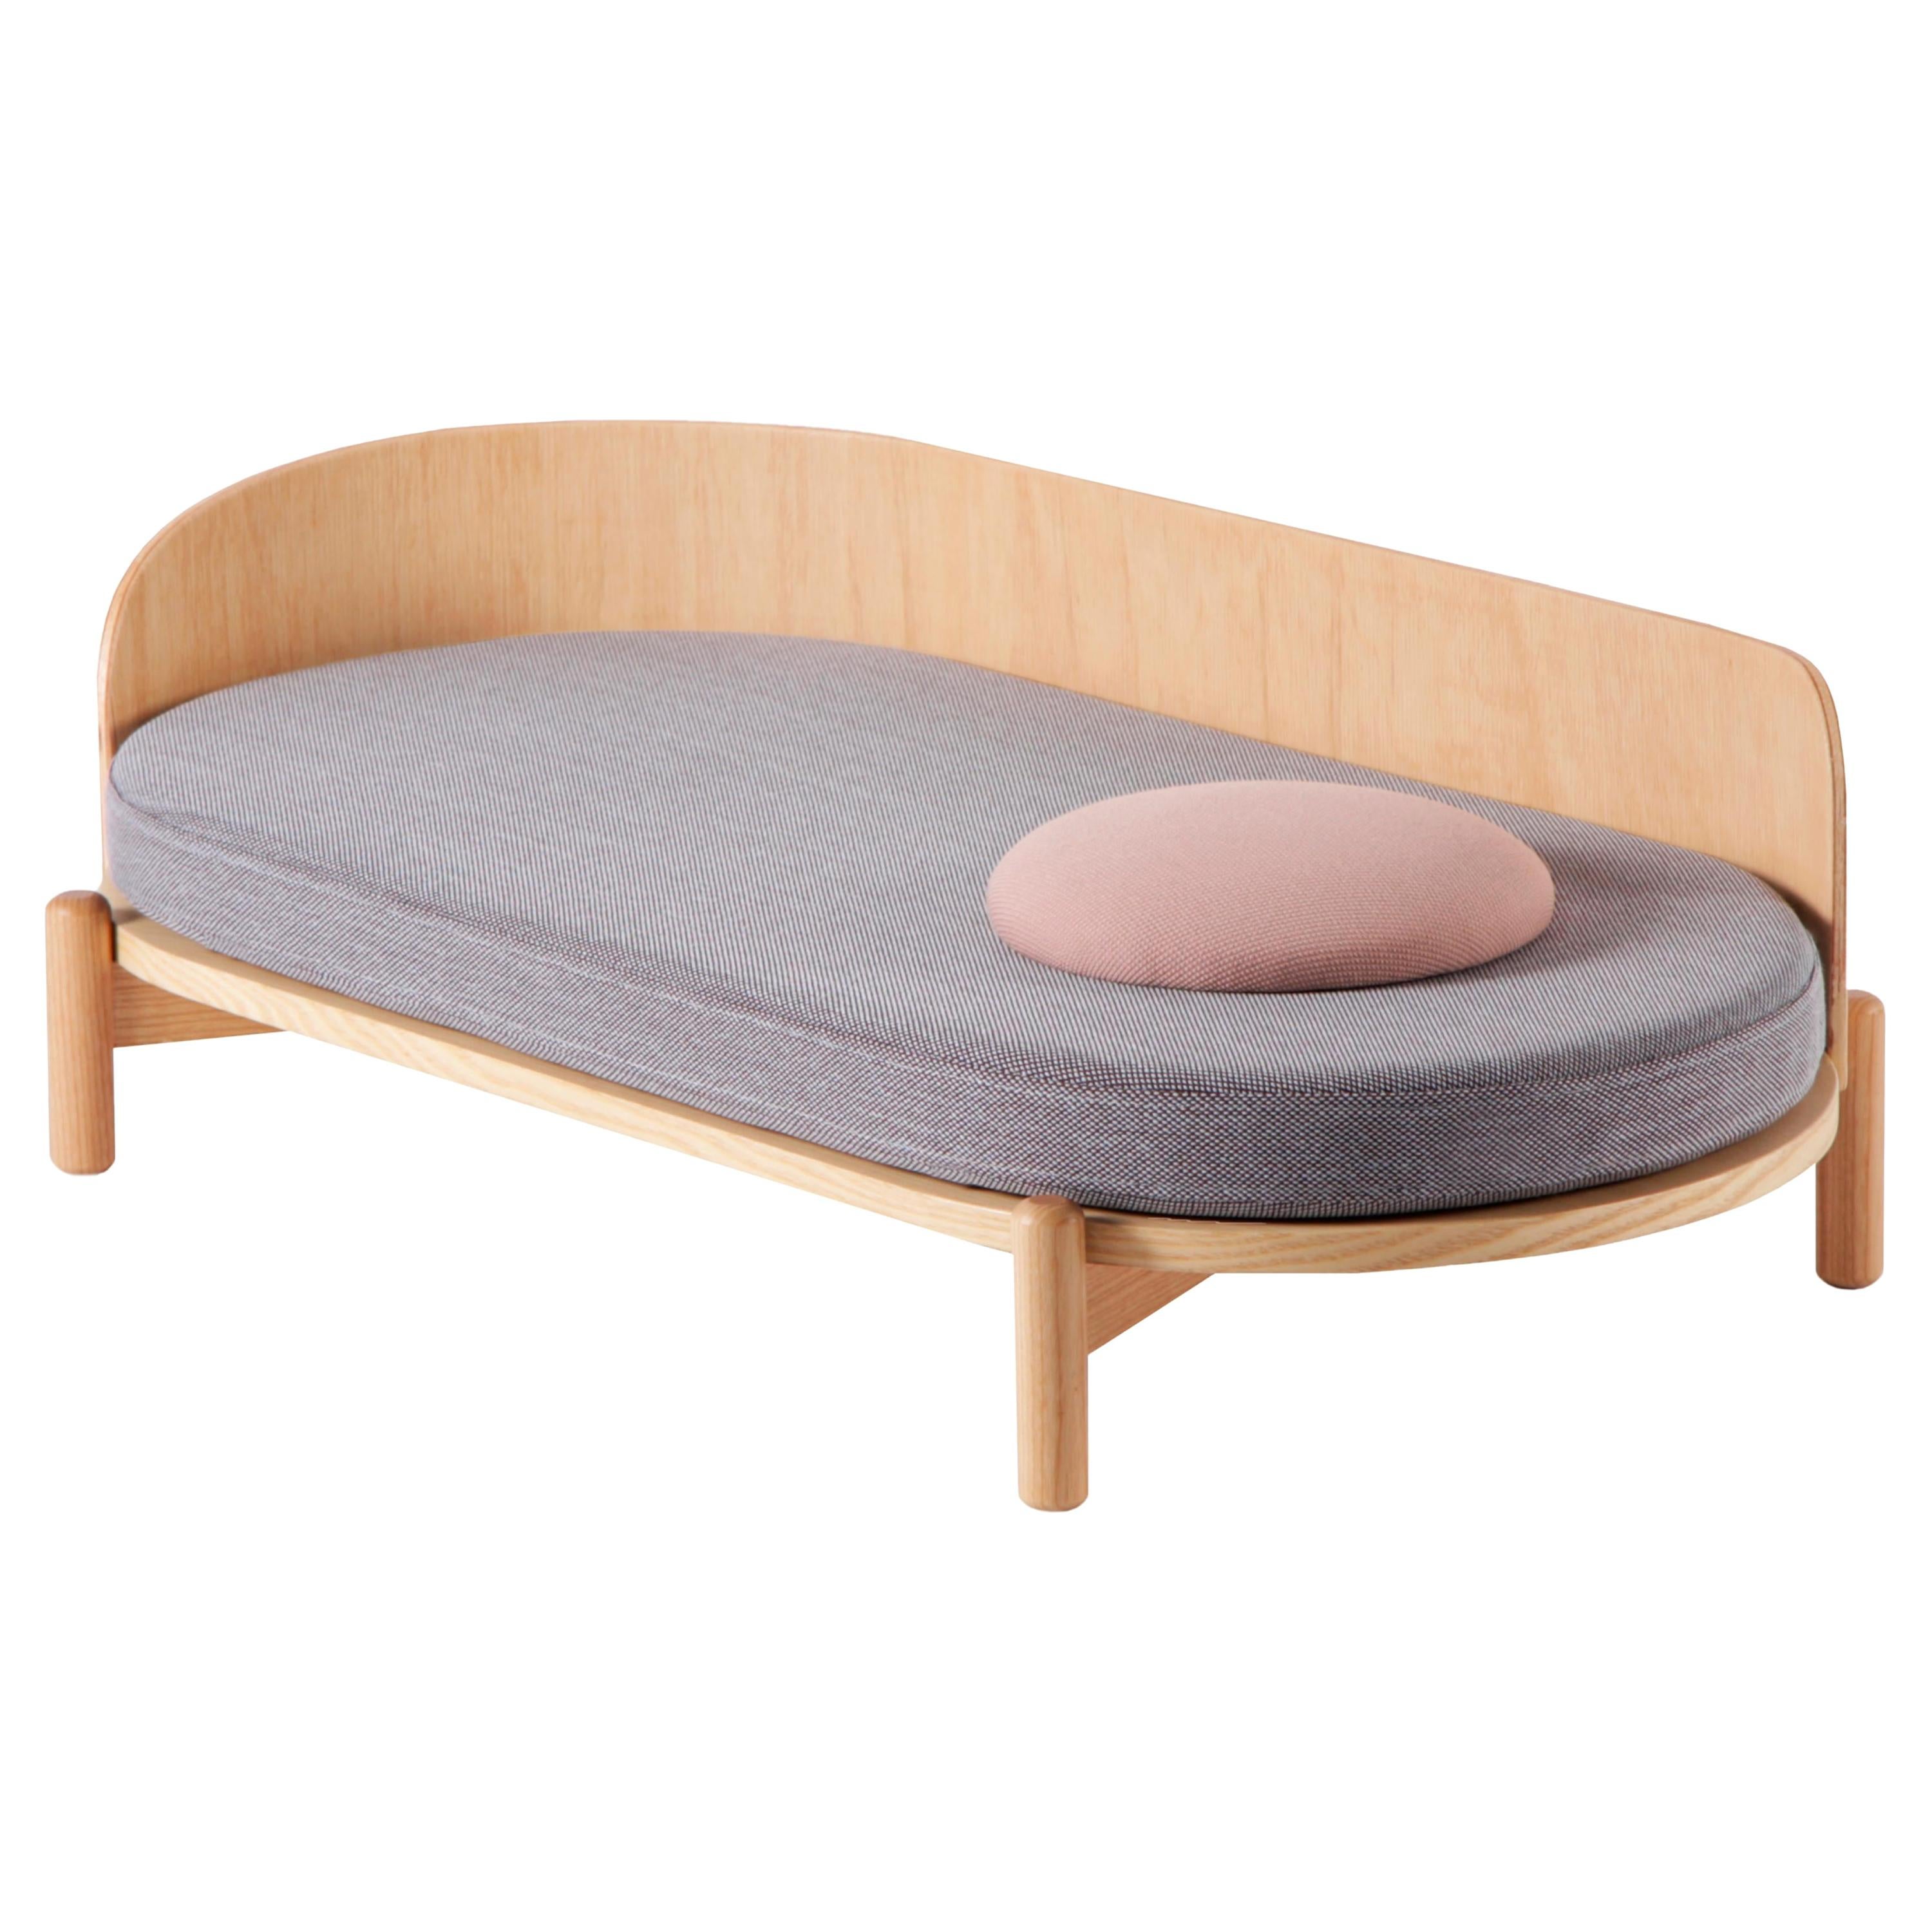 Chaise Longue "Knap" in Oak and Light Gray For Sale